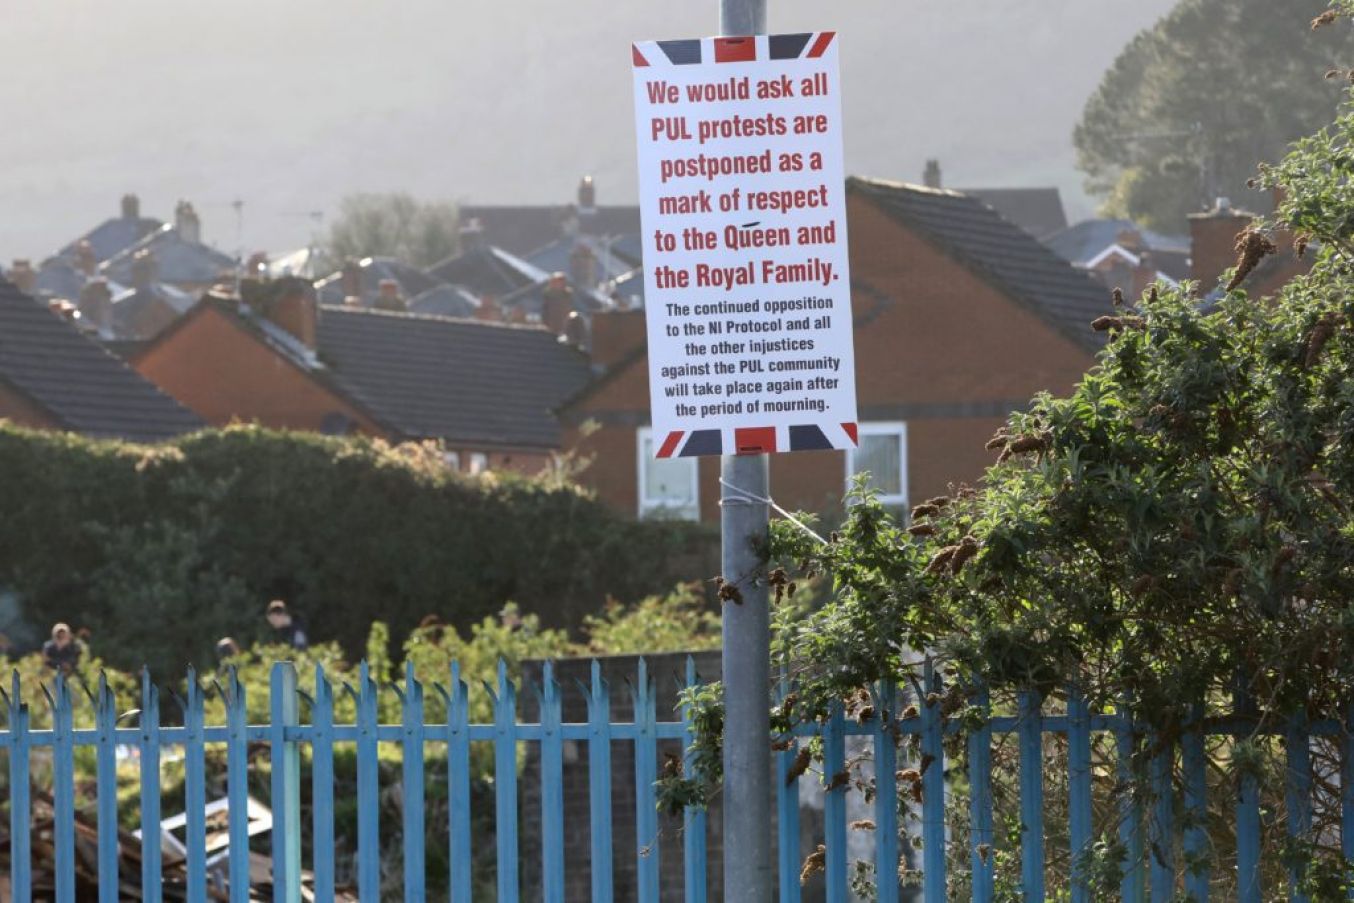 Posters In Loyalist Areas Of West Belfast On April 9Th, Which Appeared After The Announcement Of The Death Of Britain's Prince Philip. Photo: Paul Faith/Afp Via Getty